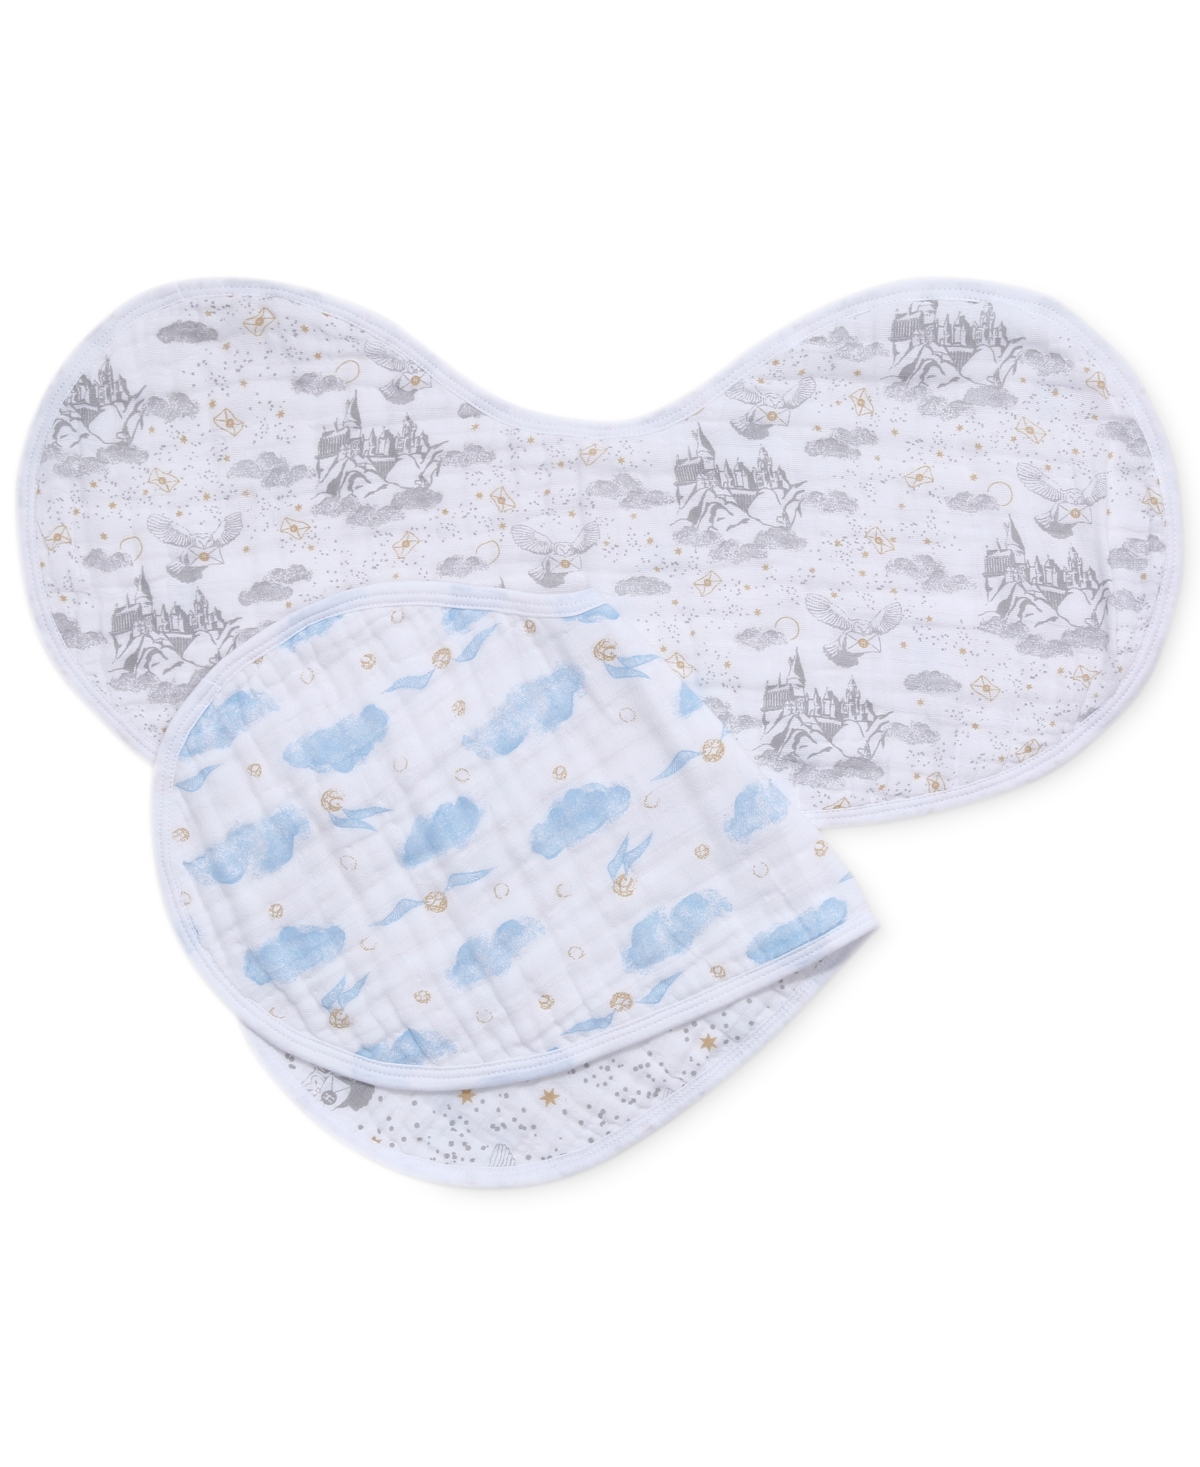 Aden By Aden + Anais Baby Boys Or Baby Girls Harry Potter Bibs, Pack Of 2 In Grey